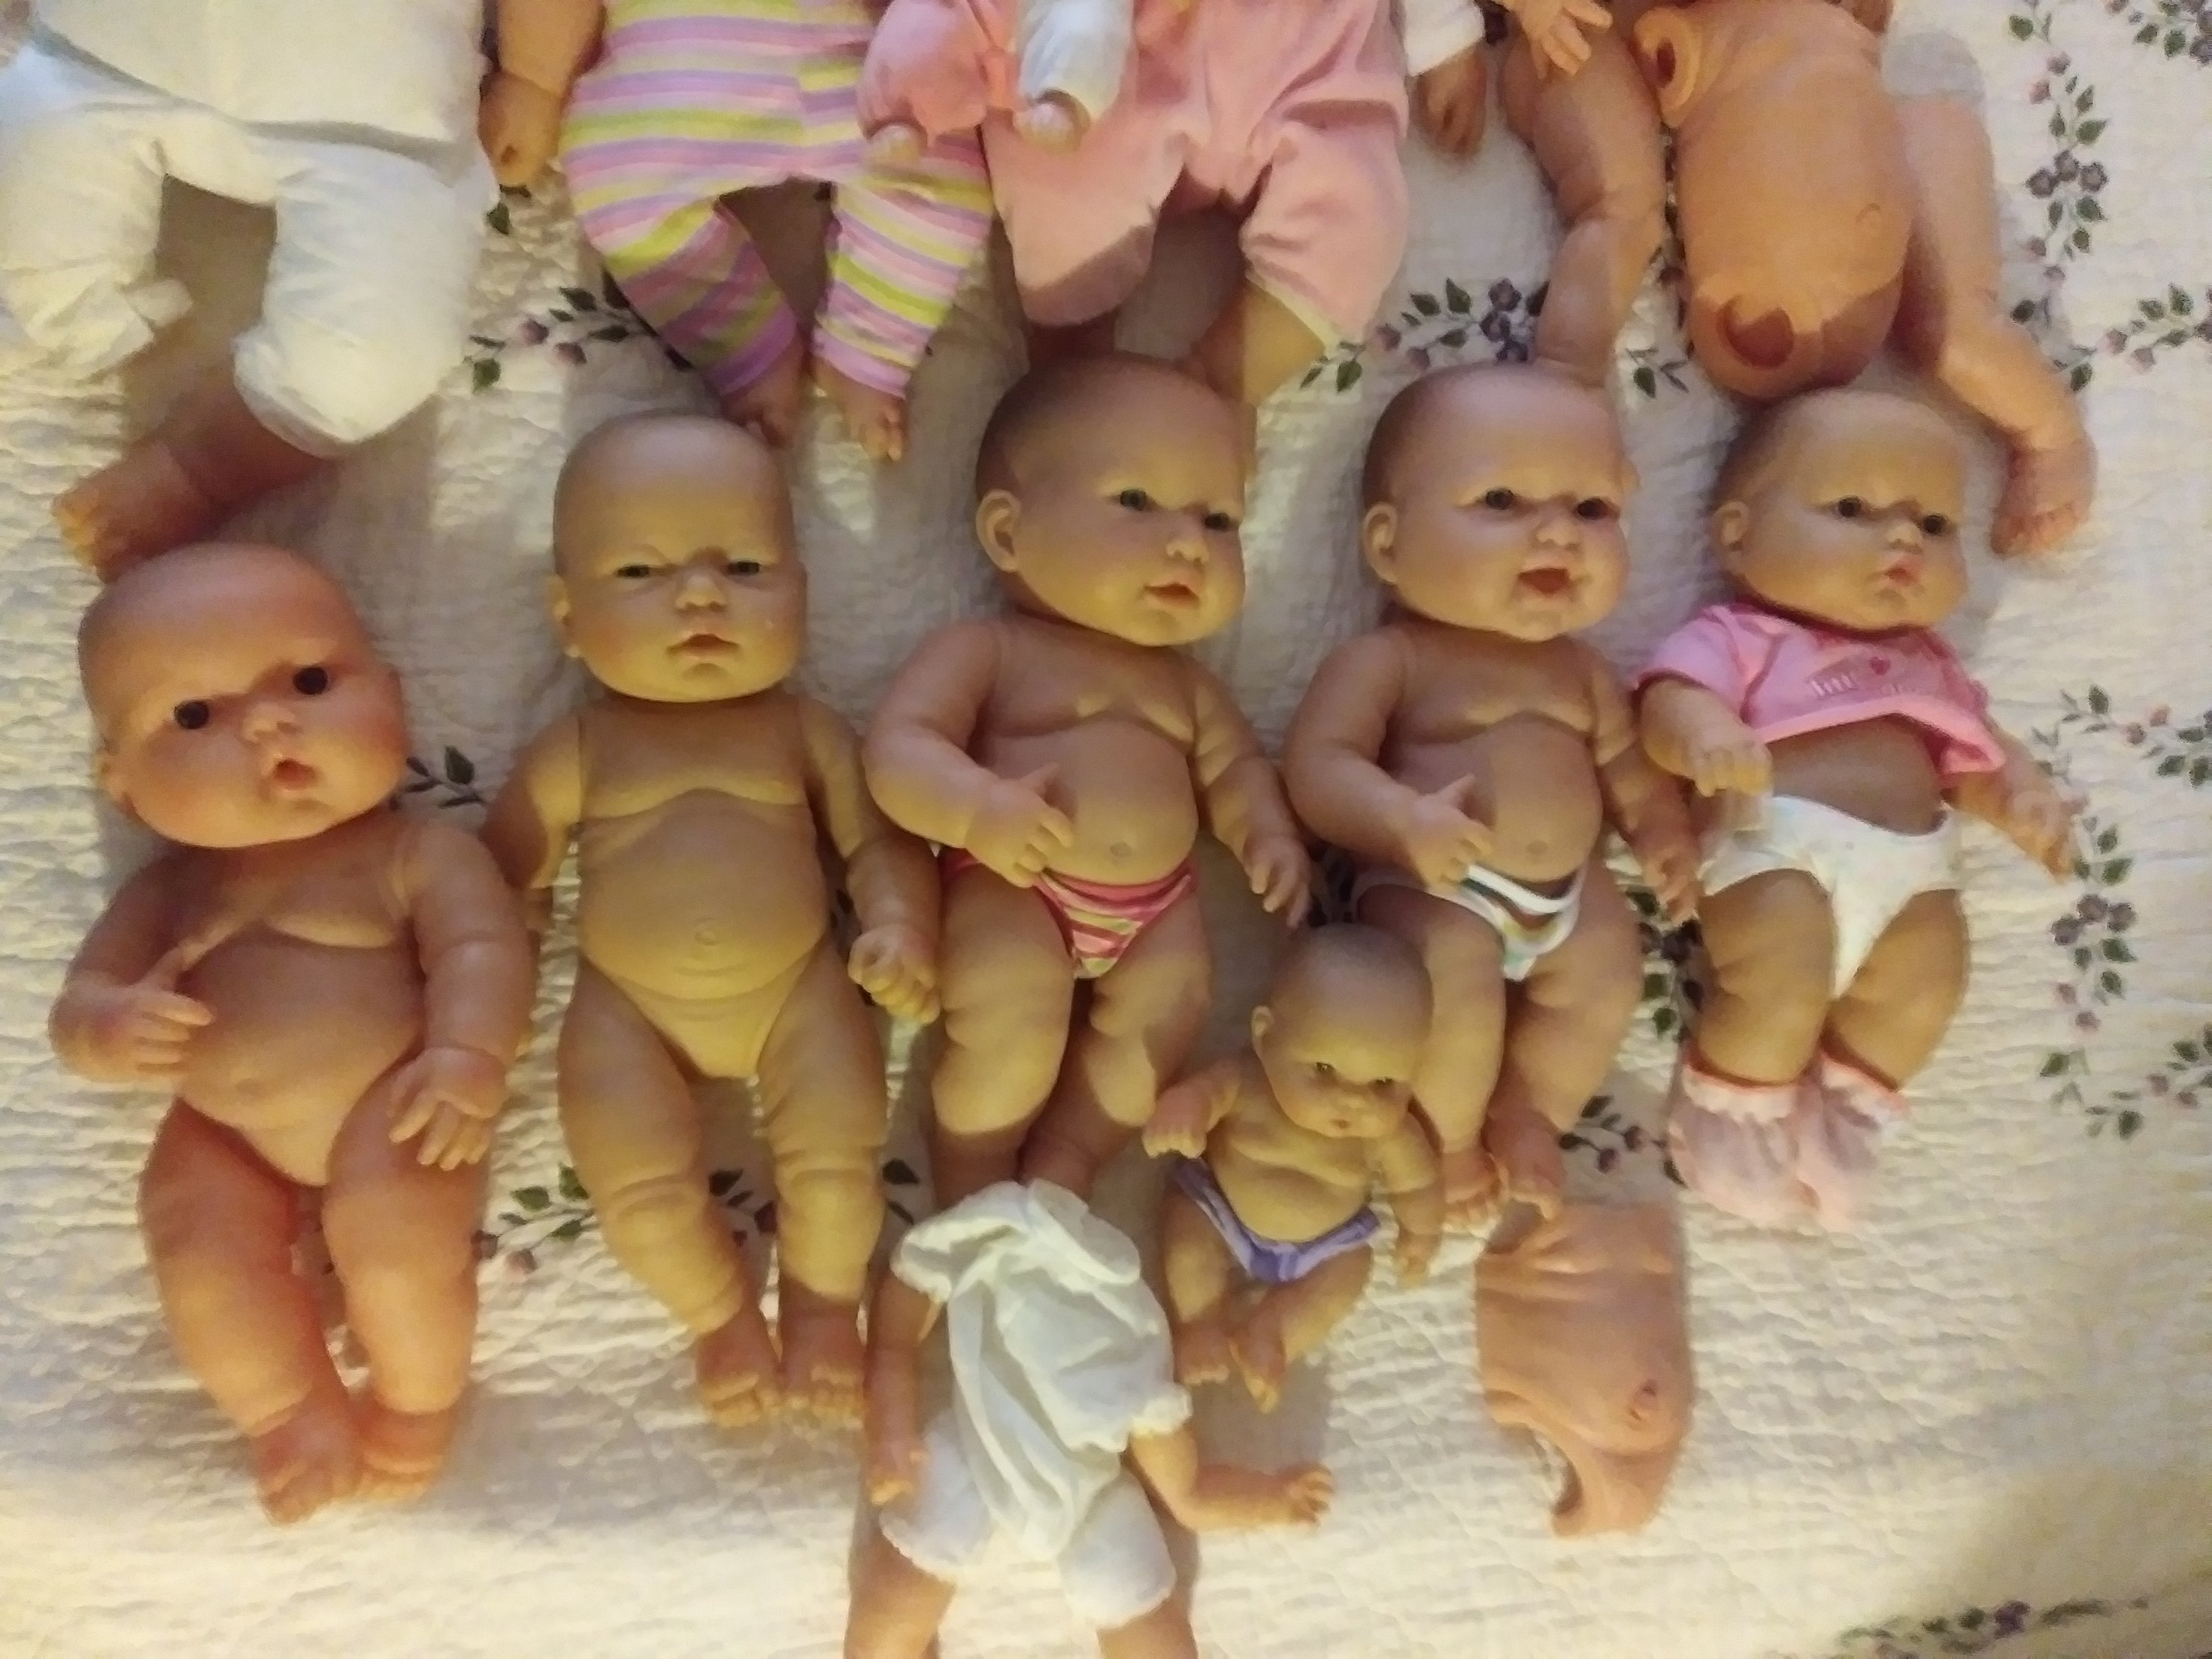 Lot of Berenguer dolls for sale - For 